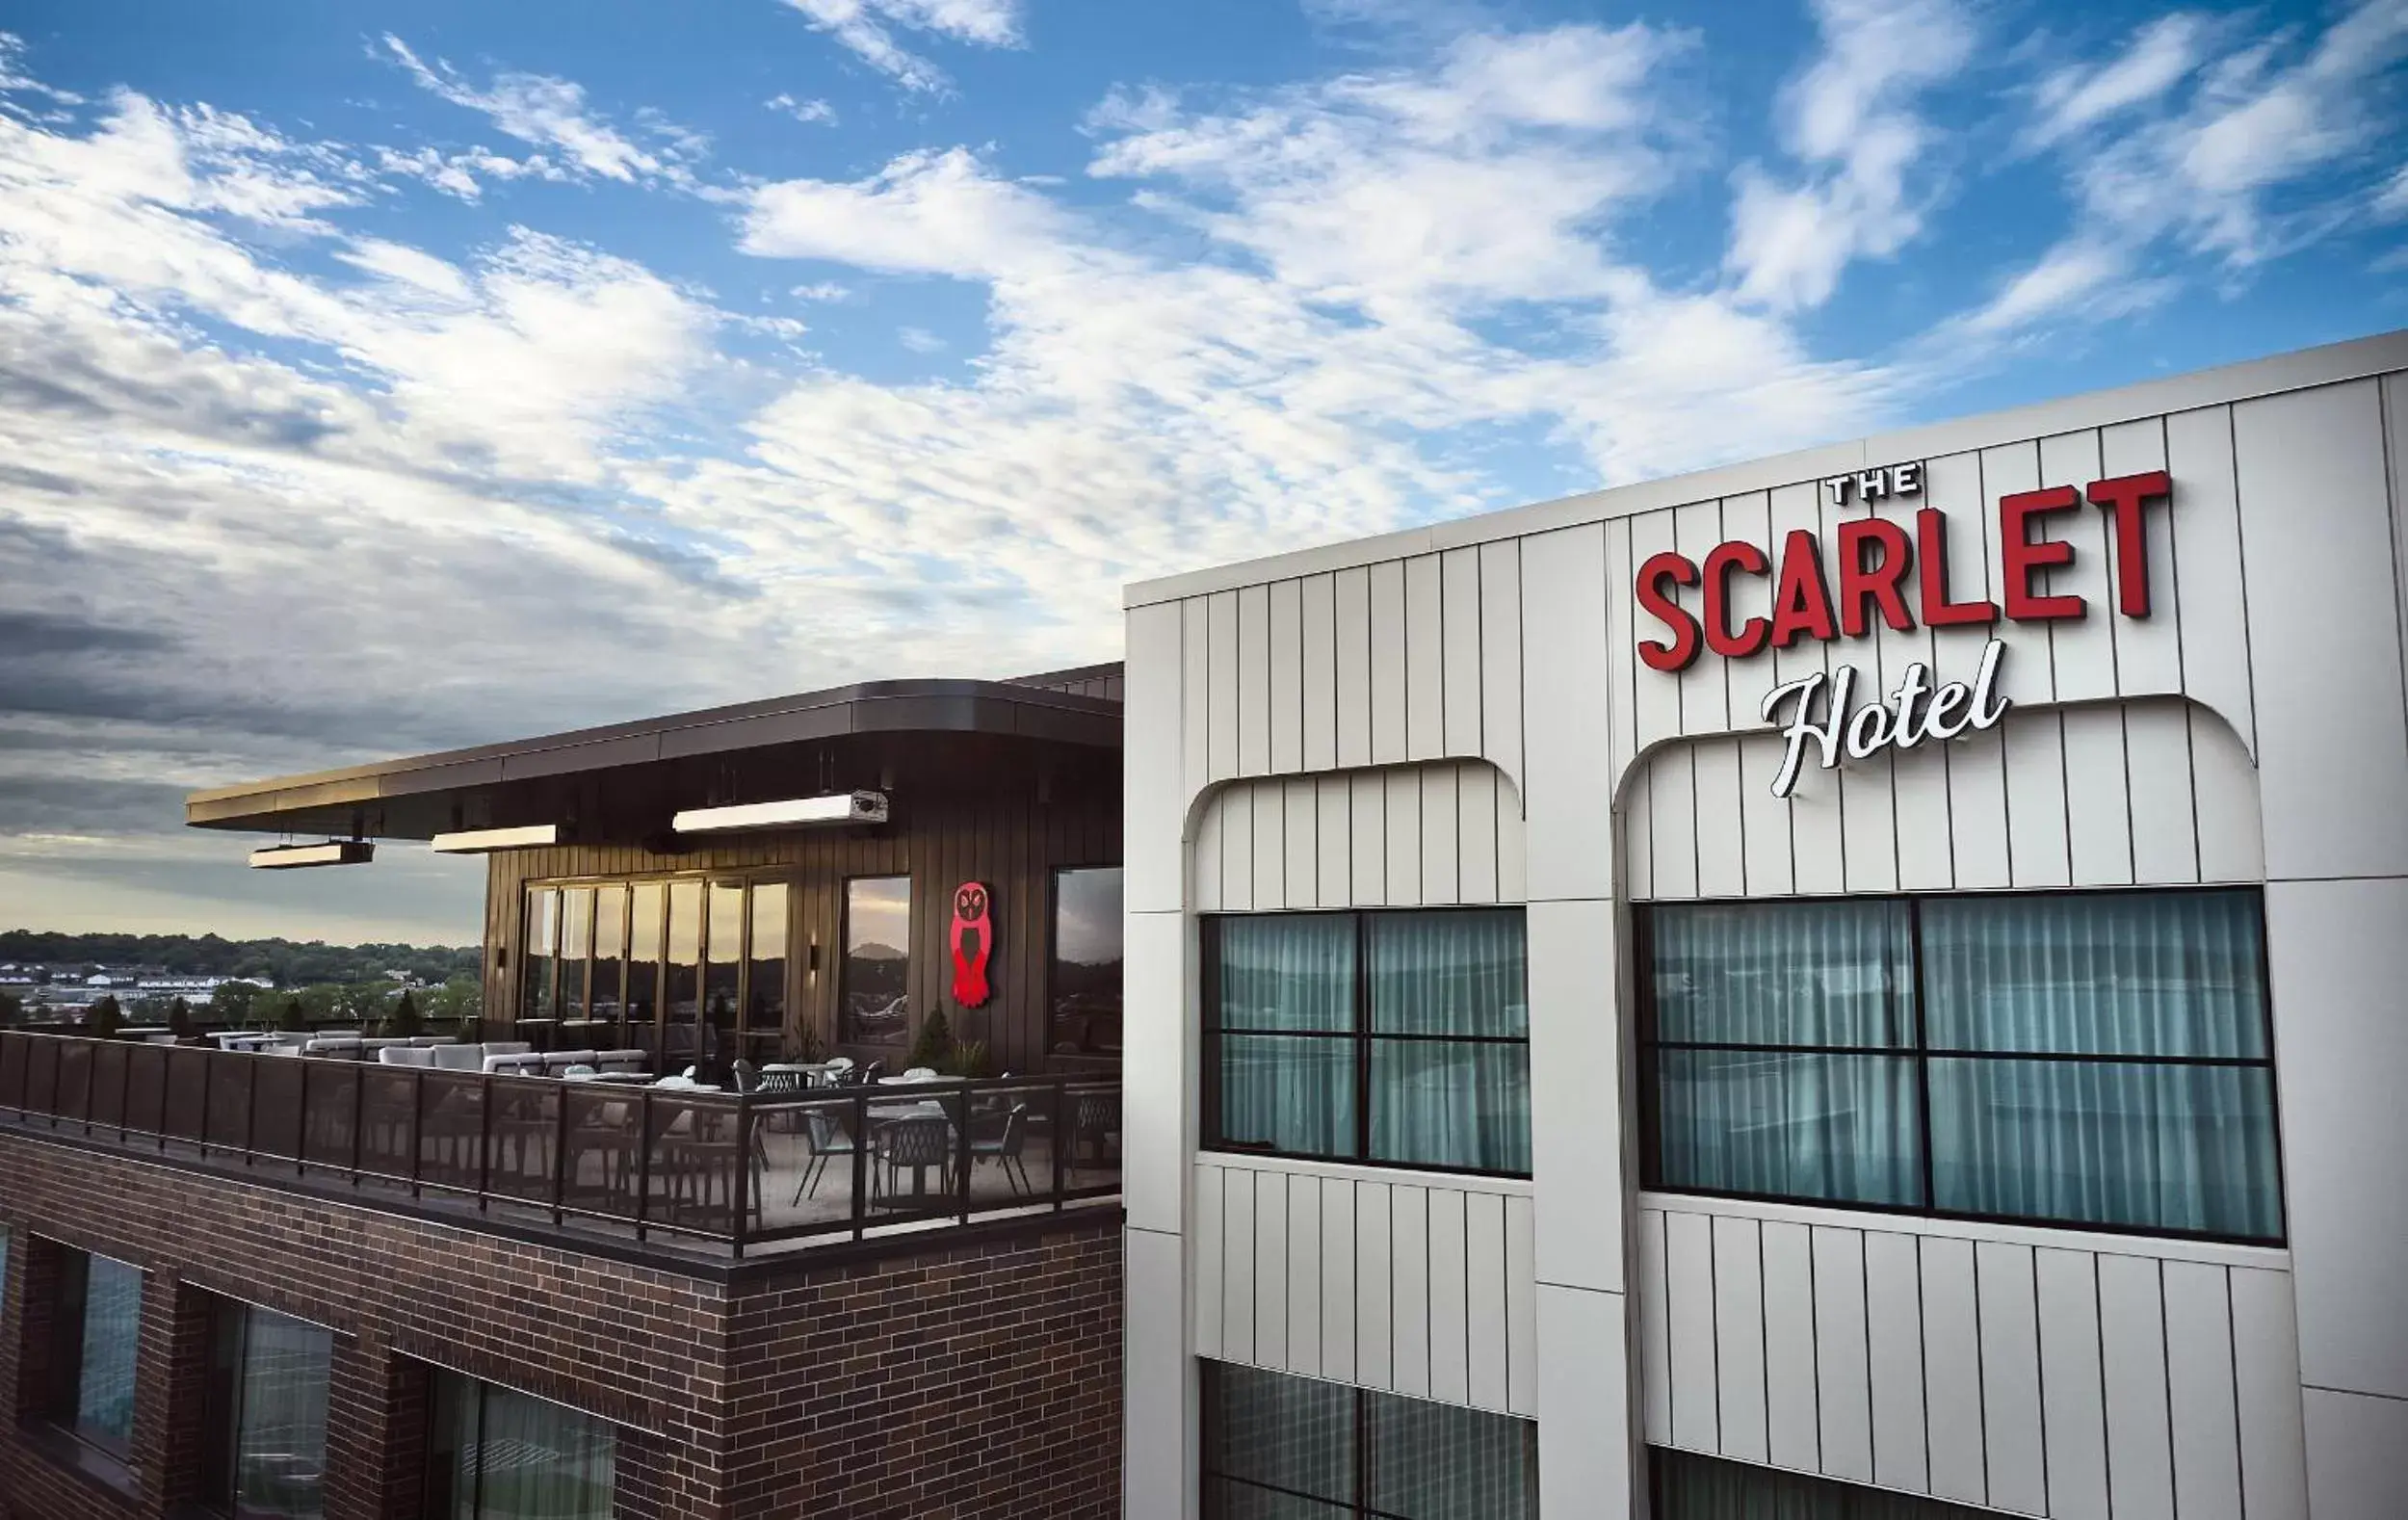 Property Building in The Scarlet, Lincoln, a Tribute Portfolio Hotel